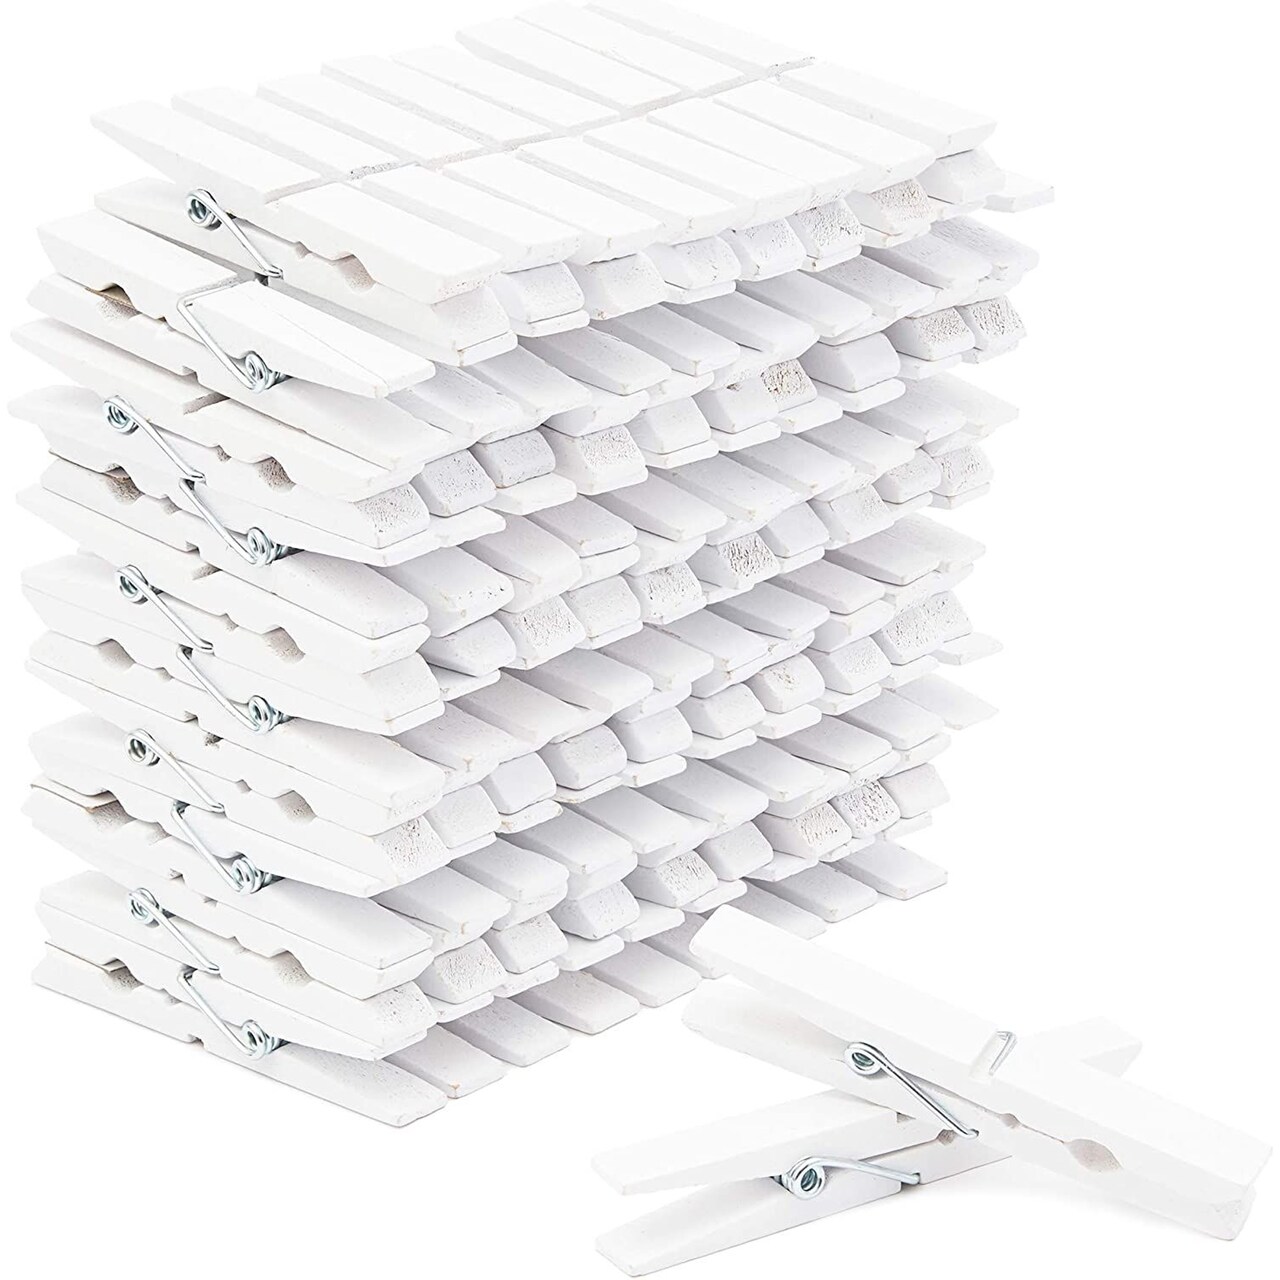 100 Pack Bulk Large White Clothespins for Hanging Laundry, Photos, DIY Crafts (4 In)